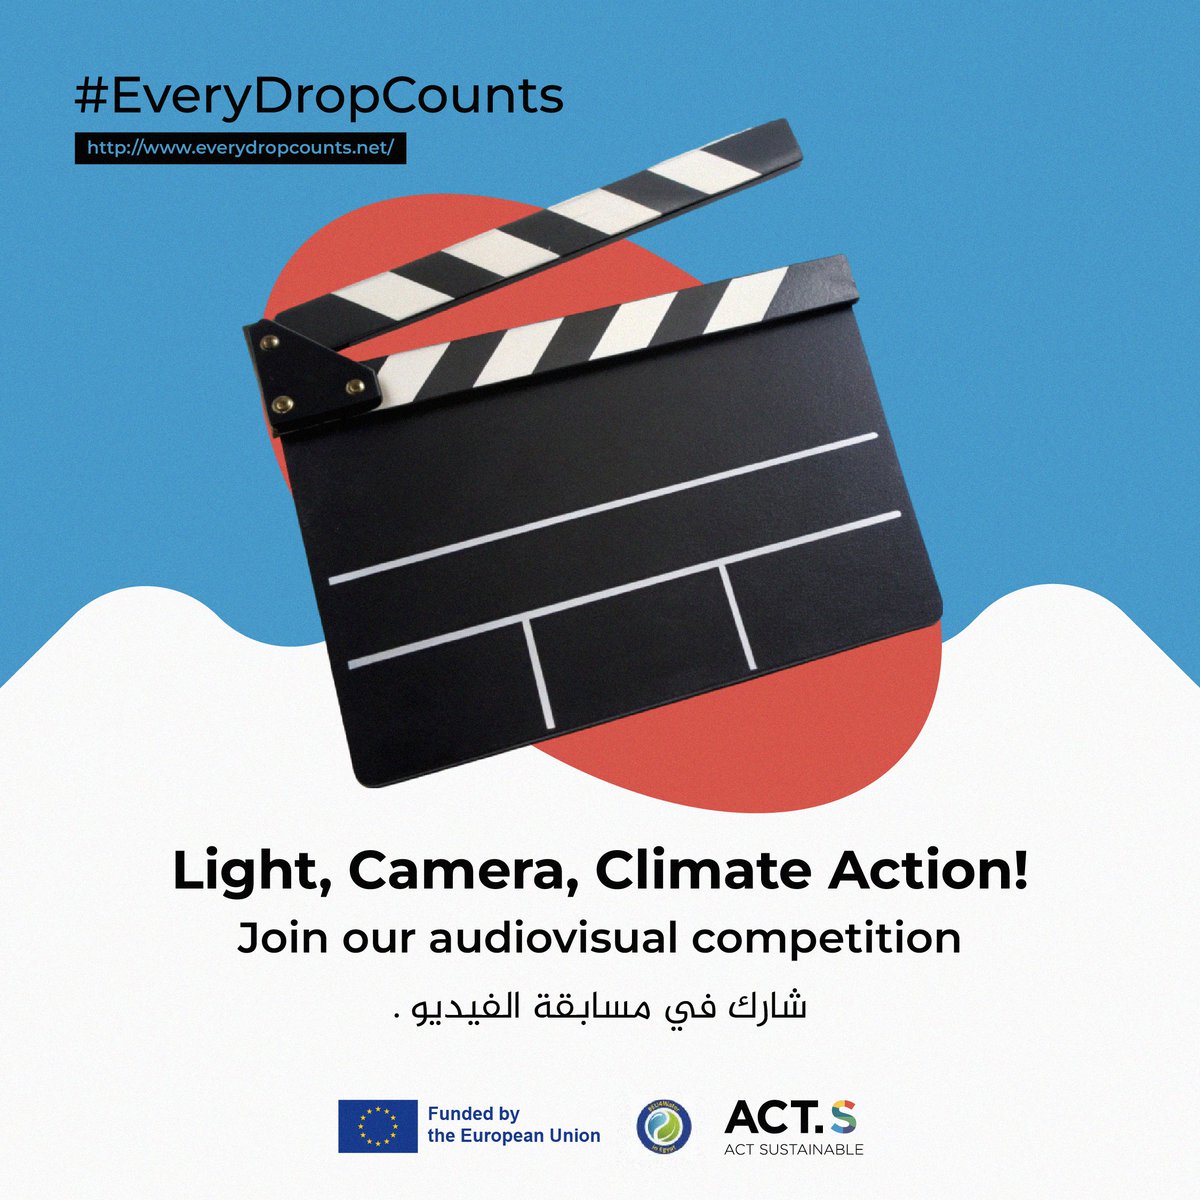 Lights, video, climate action! 🎬

Create an audiovisual masterpiece that resonates with water's vital role in our world through your own lens and sound and  share your video on social media or submit via our website - everydropcounts.net/competitions/ - with the hashtag #EveryDropCounts